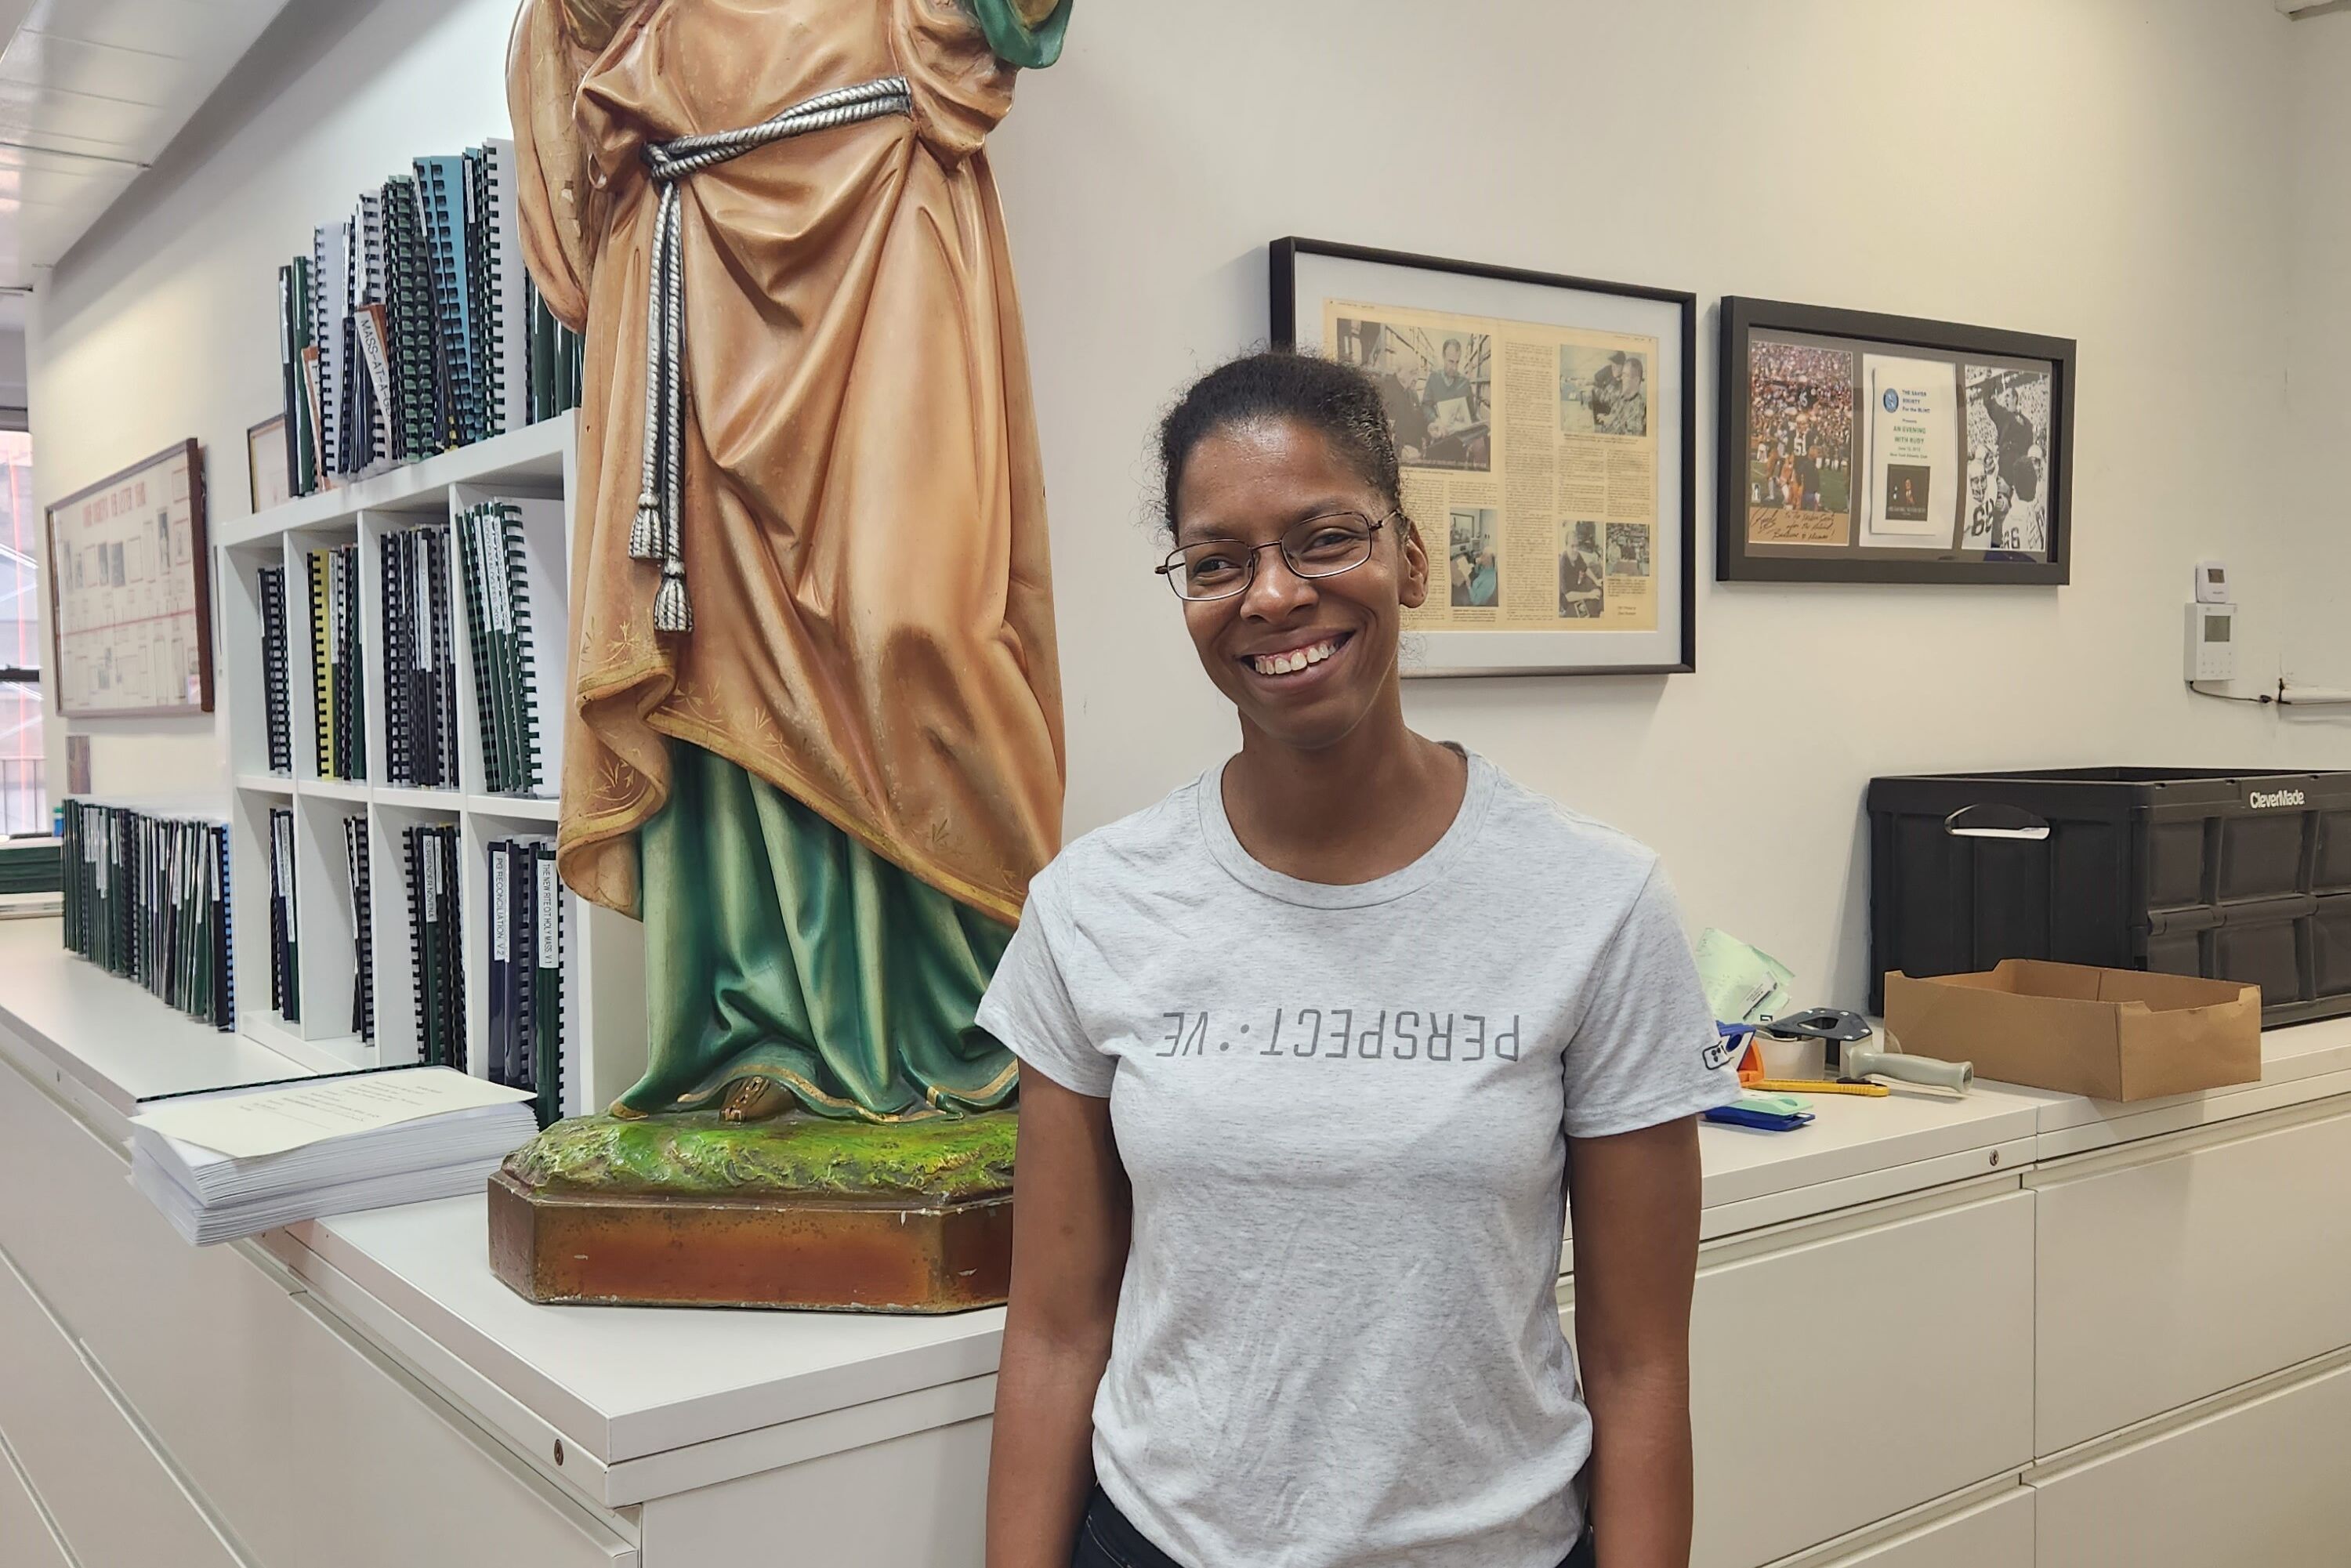 Tiffany, a young woman with glasses, pictured in front of our St. Lucy statue in our office